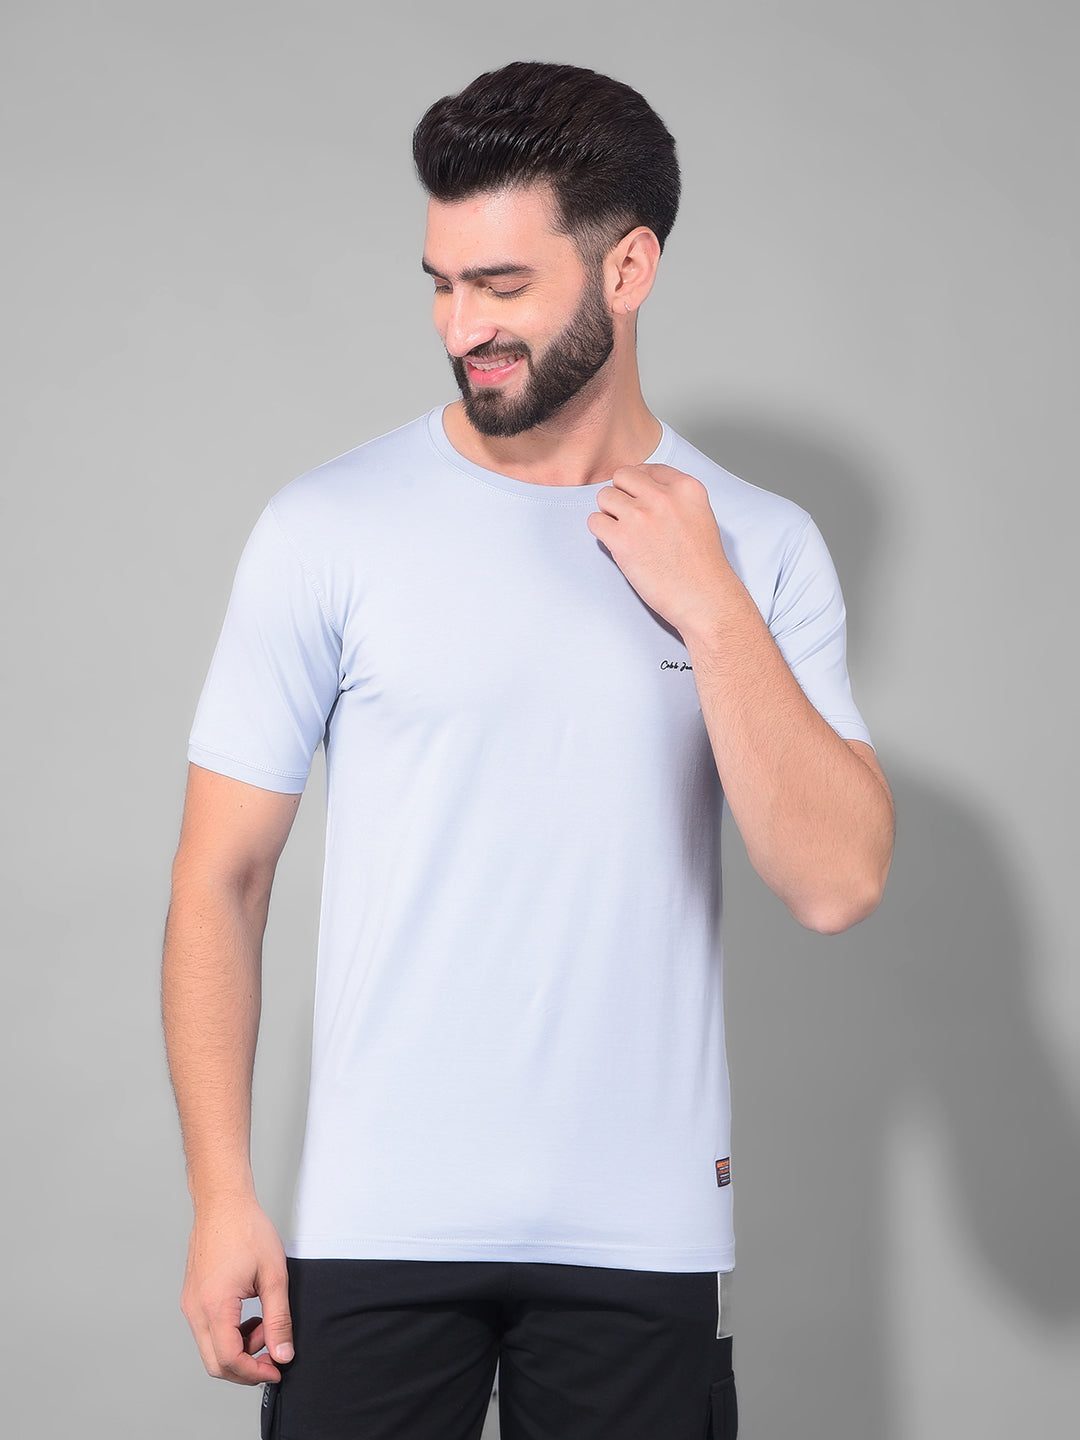 cobb solid periwinkle round neck t-shirt